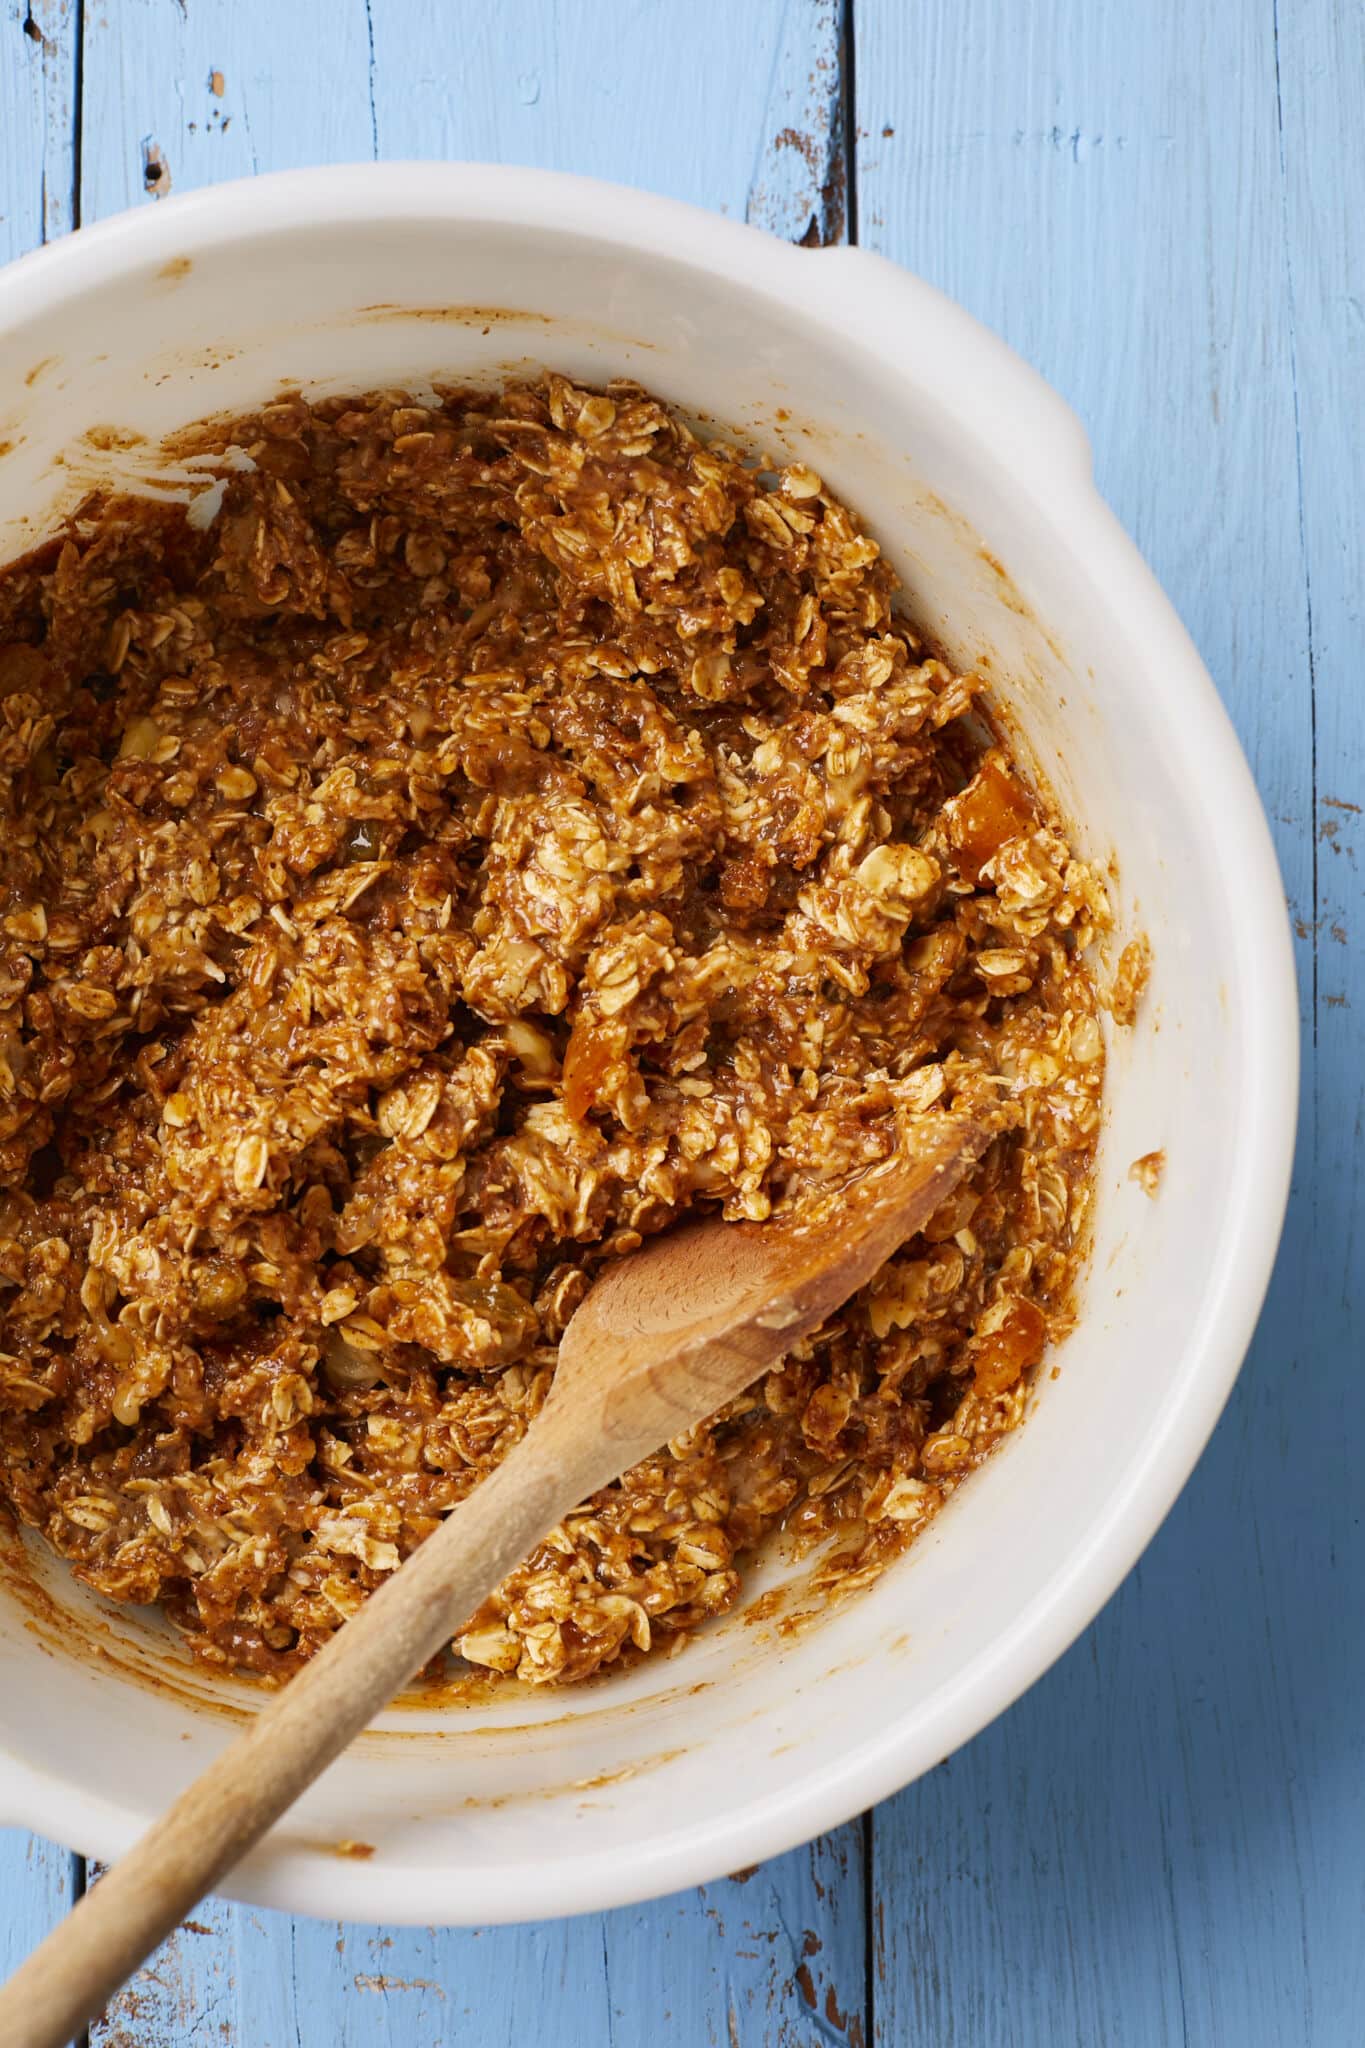 Step-by-step instructions: use a wooden spoon to mix dry ingredients including rolled oats, dried fruit, coconut flakes cinnamon, salt together then add in wet ingredients including peanut butter, mashed bananas, eggs and honey into a well-combined thick batter. 